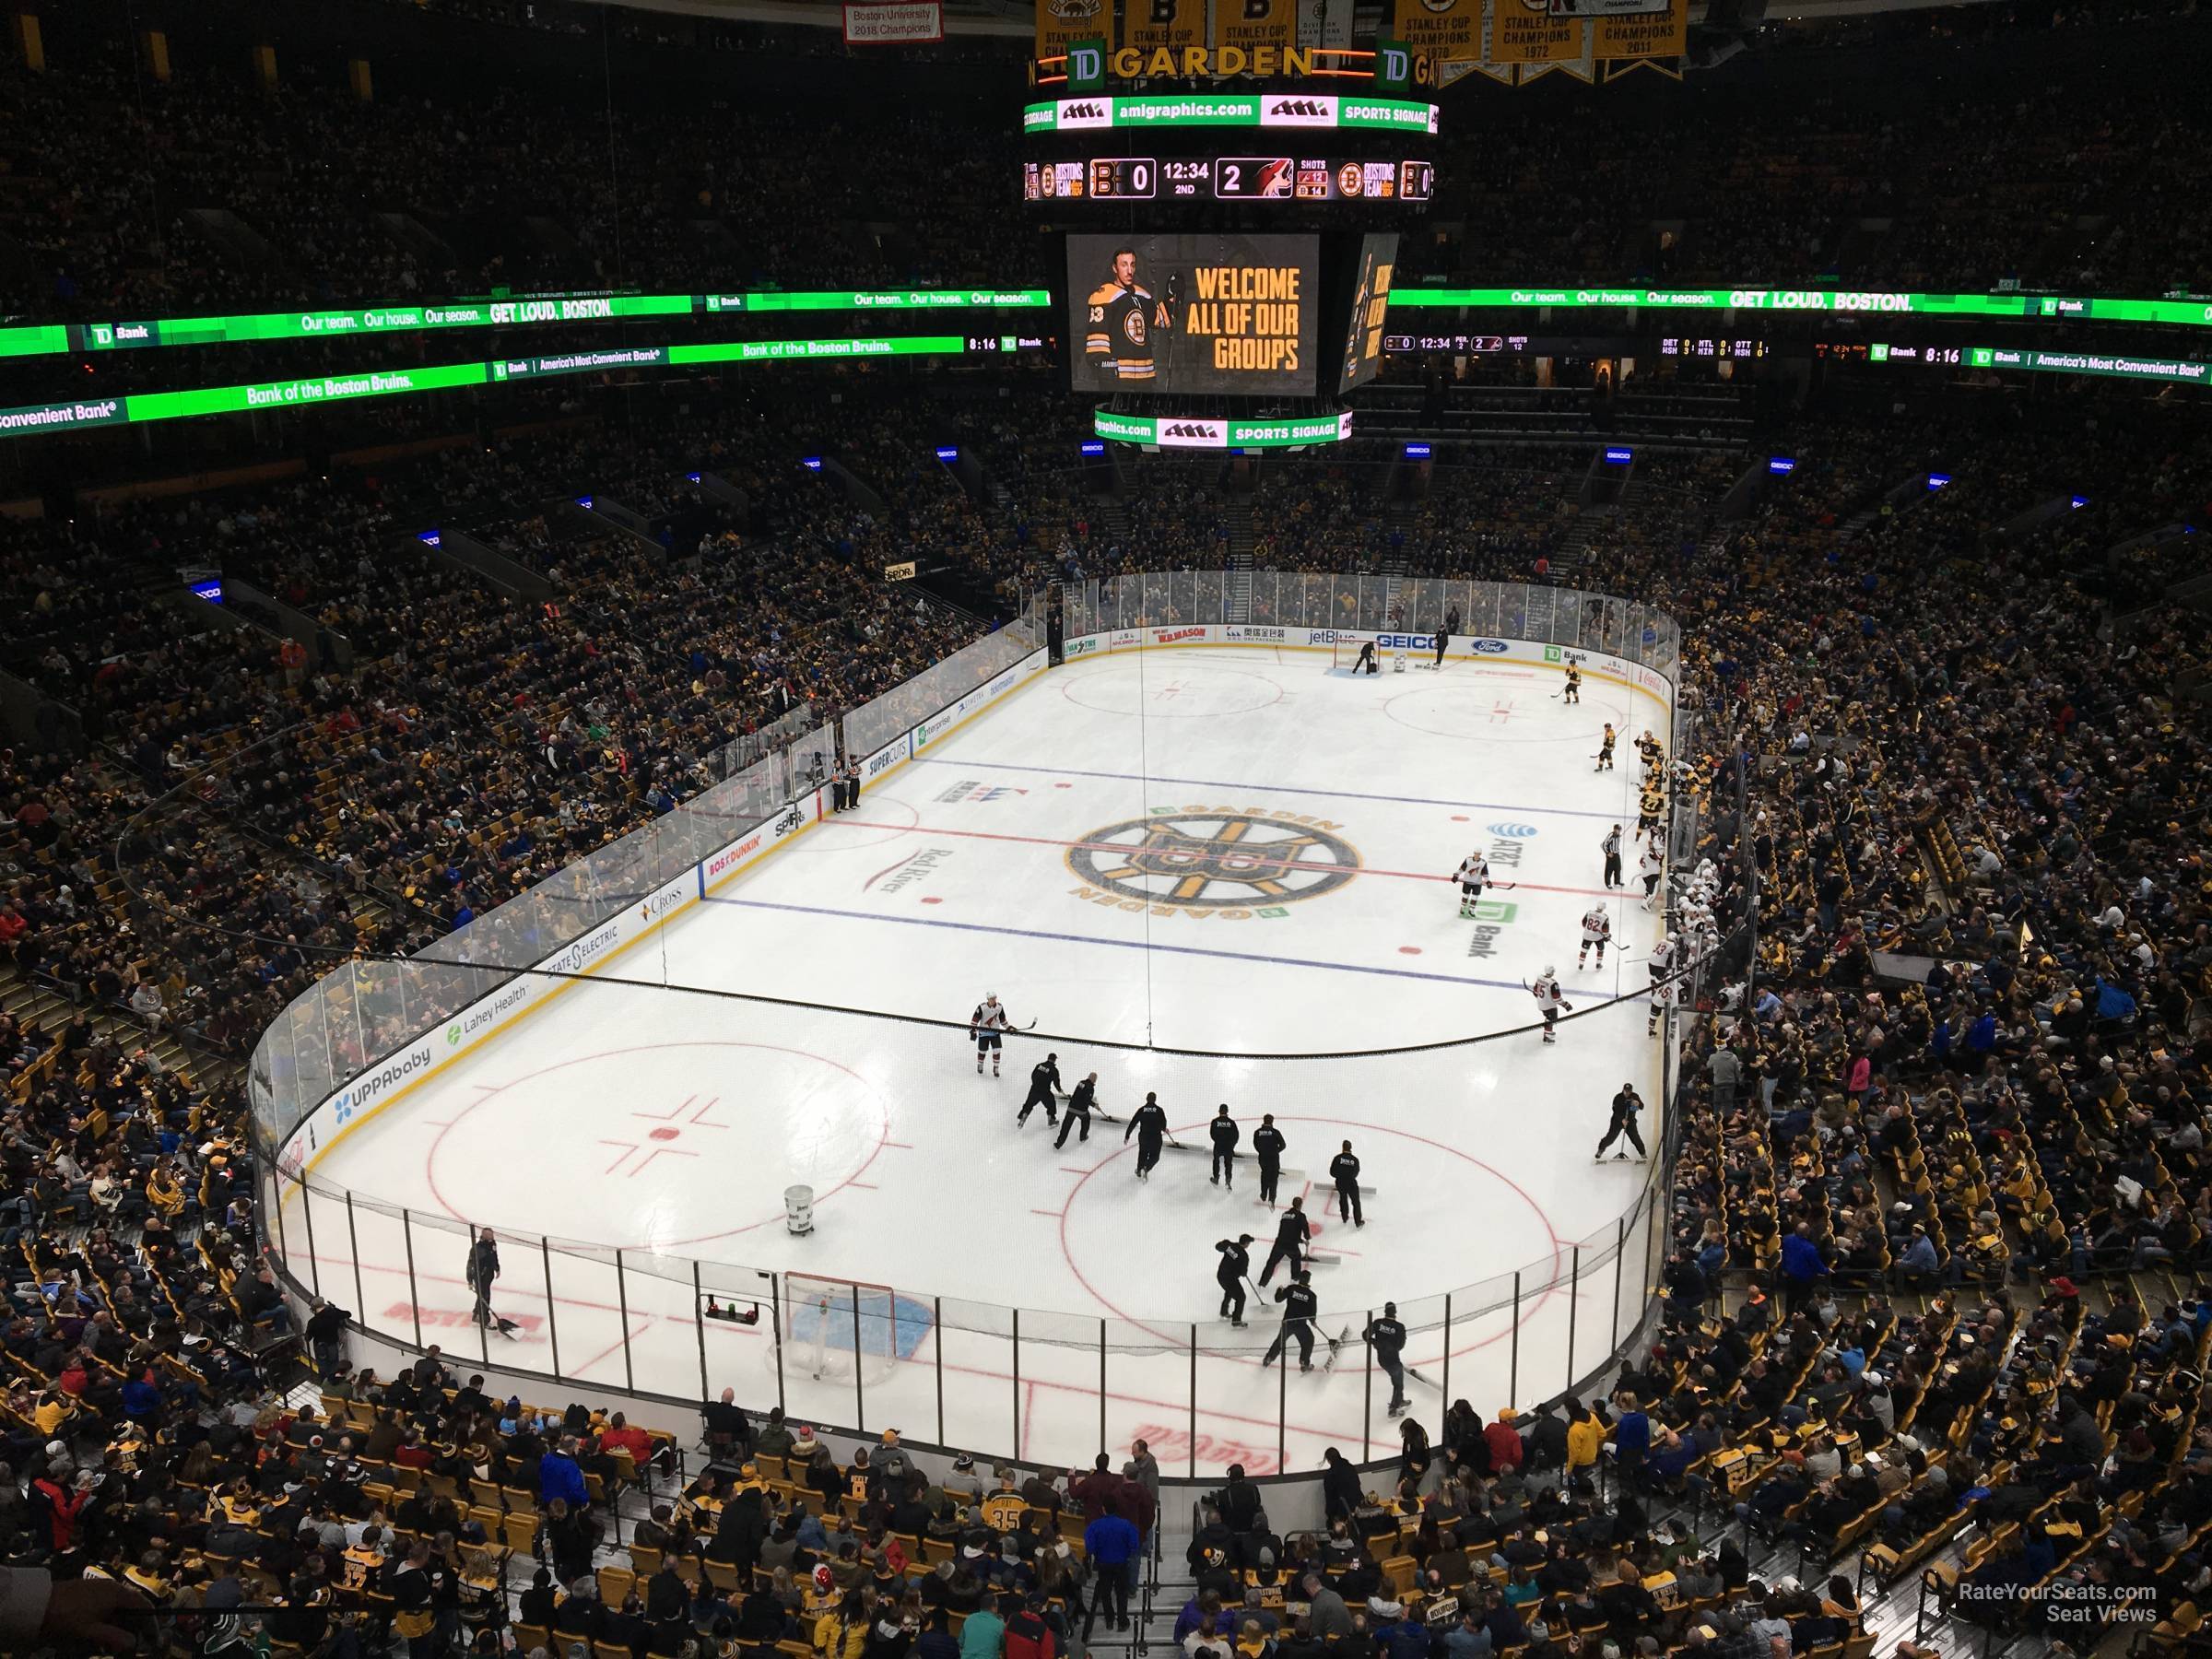 section 307, row 3 seat view  for hockey - td garden